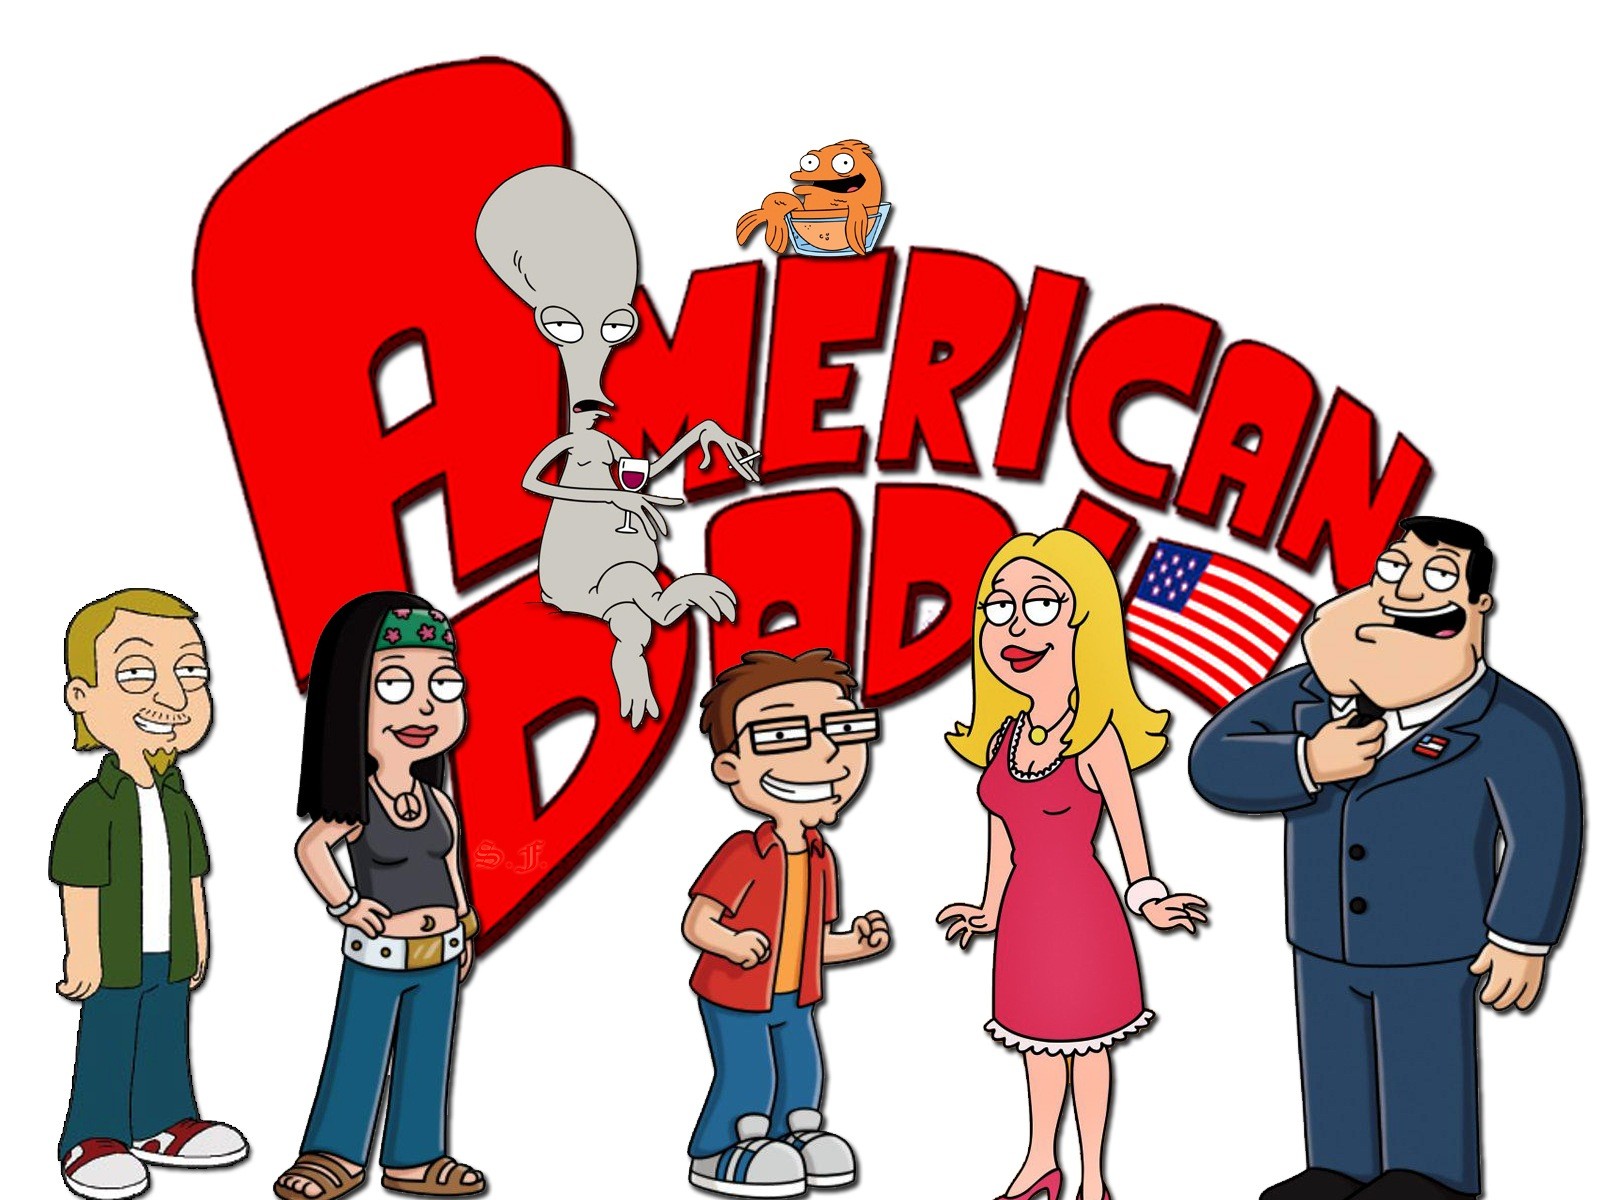 American Dad! Backgrounds, Compatible - PC, Mobile, Gadgets| 1600x1200 px